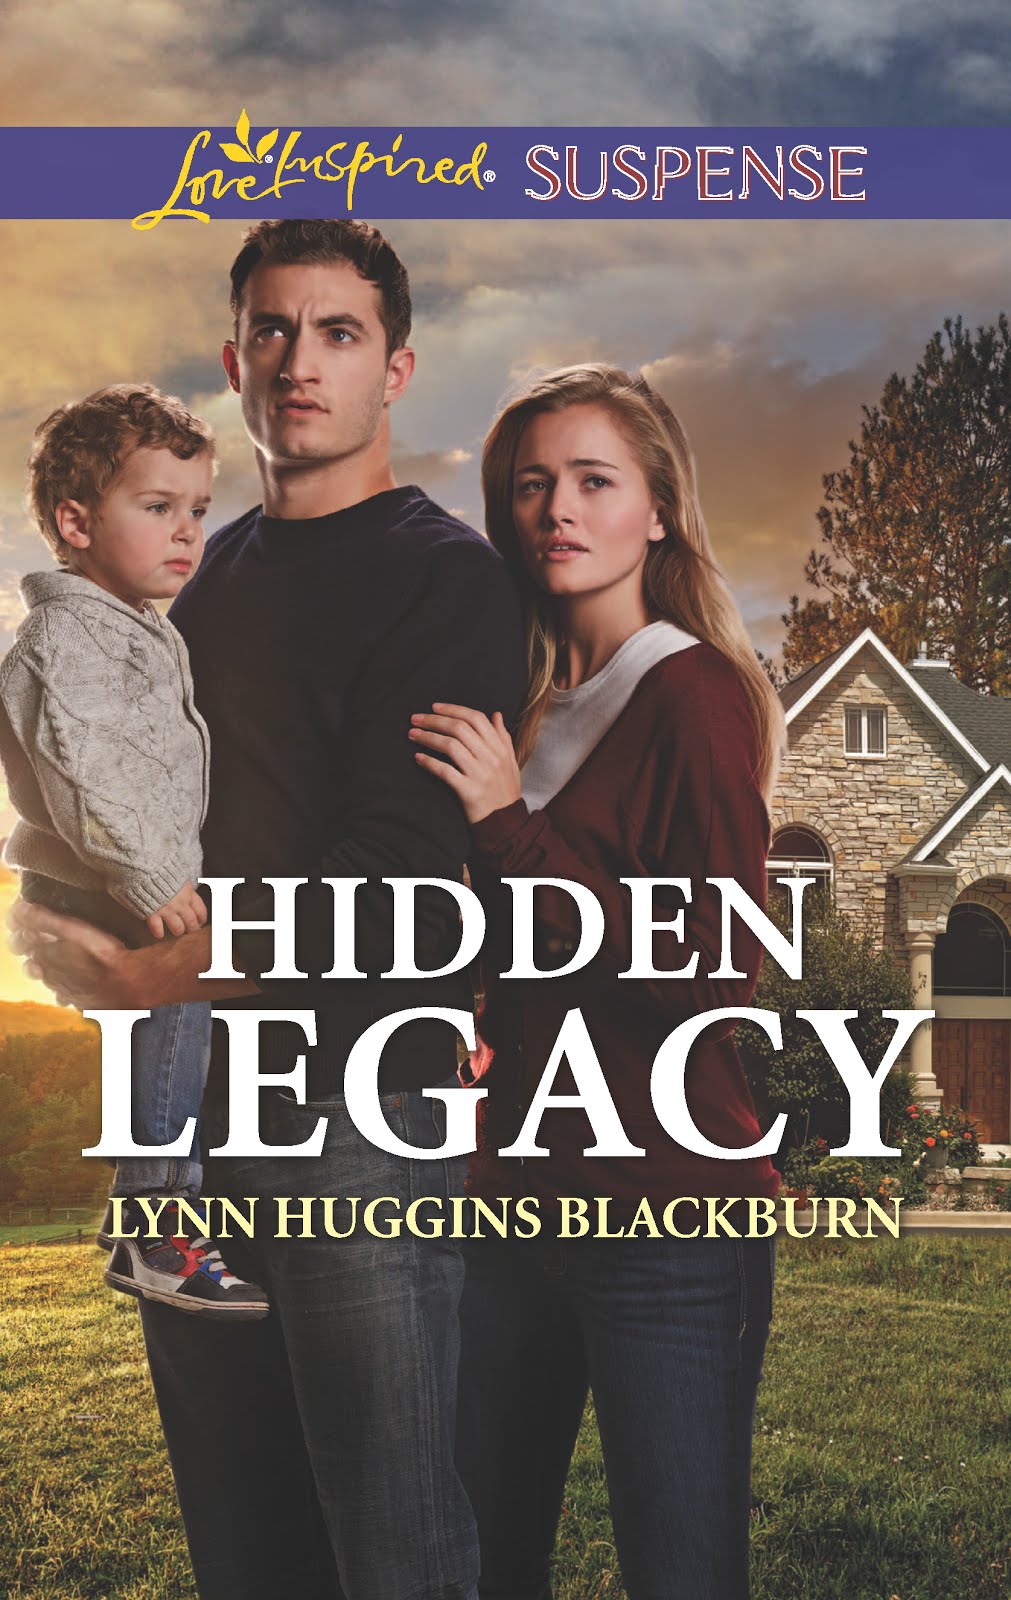 Hidden Legacy is available now!